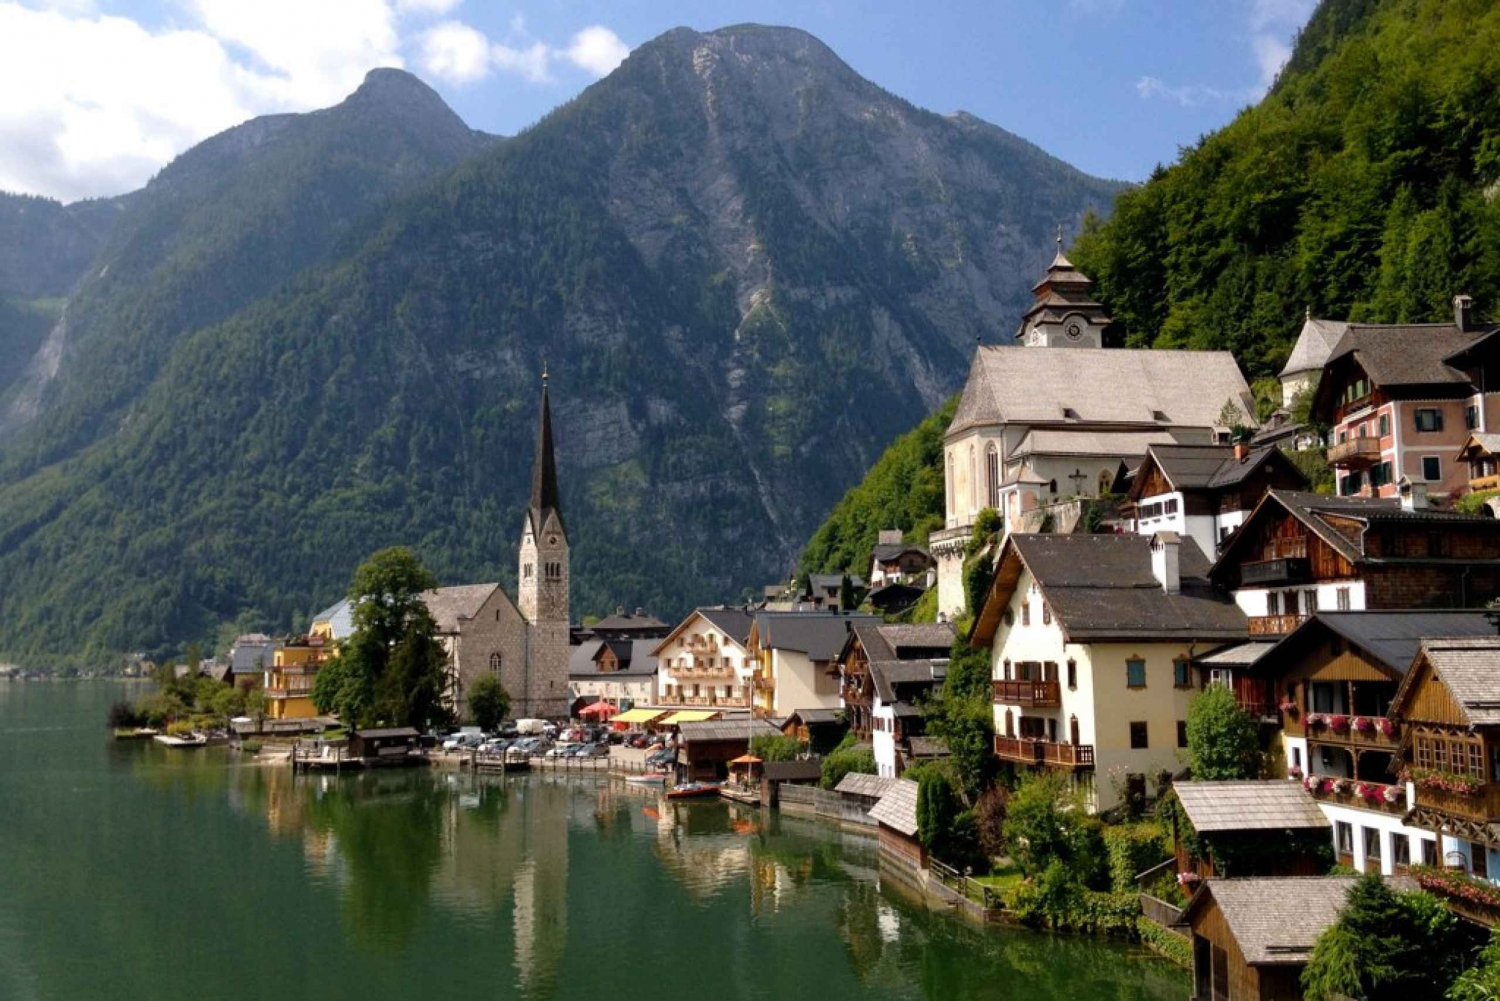 Private Day Trip to Hallstatt including Beautiful Alps